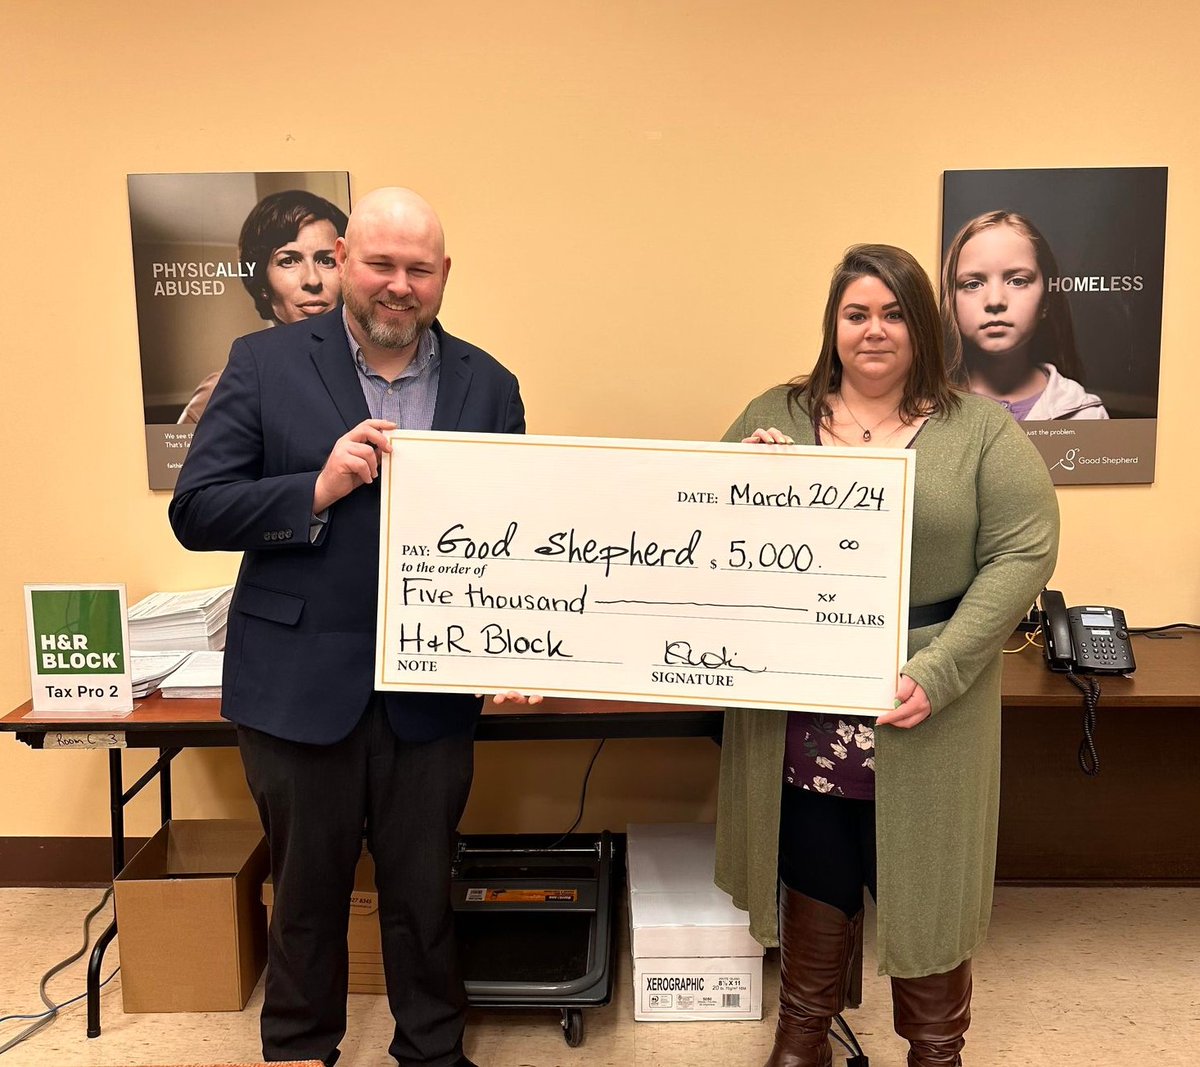 Thank you @HRBlockCanada and the Returning Hope Program for providing free tax filing to help low-income & vulnerable Canadians file their taxes. We're grateful for the added donation of $5,000 for Good Shepherd Programs! Pictured is Brian Fyfe, District Manager of H&R Block.